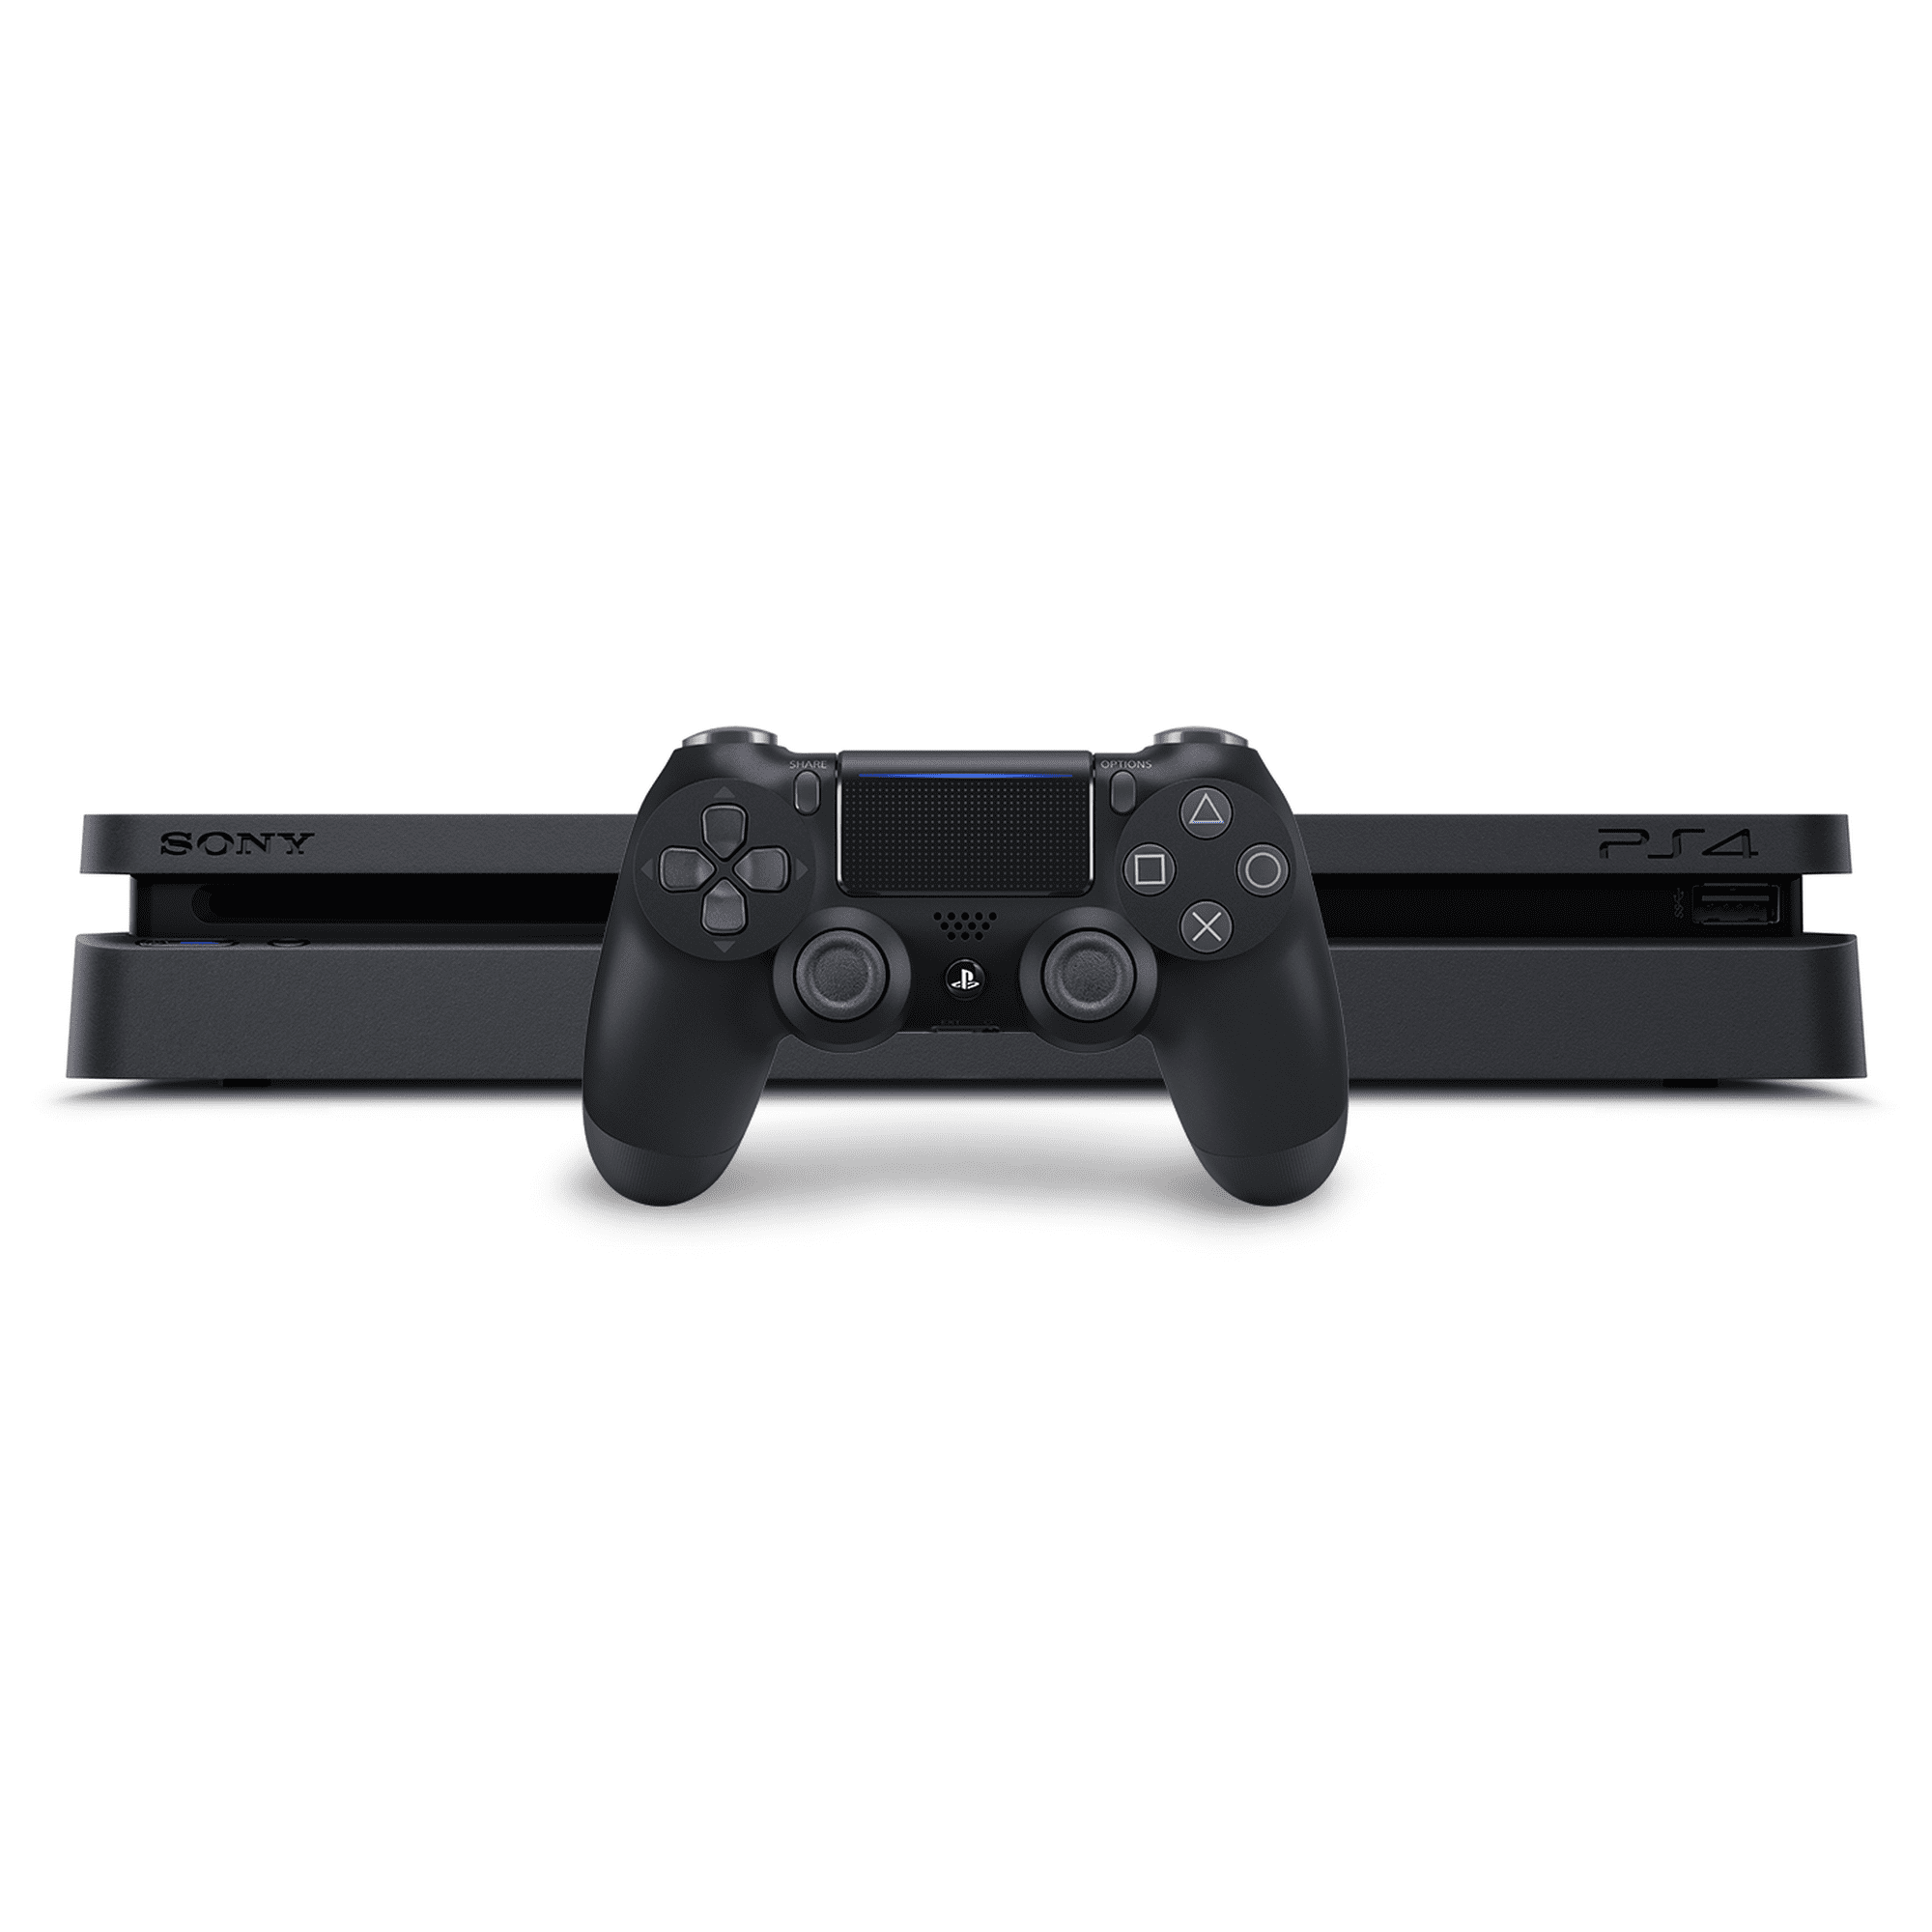 PlayStation 4 1TB Console with Ghost of Tsushima - PS4 Slim 1TB Jet Black  HDR Gaming Console, Wireless Controller and Game